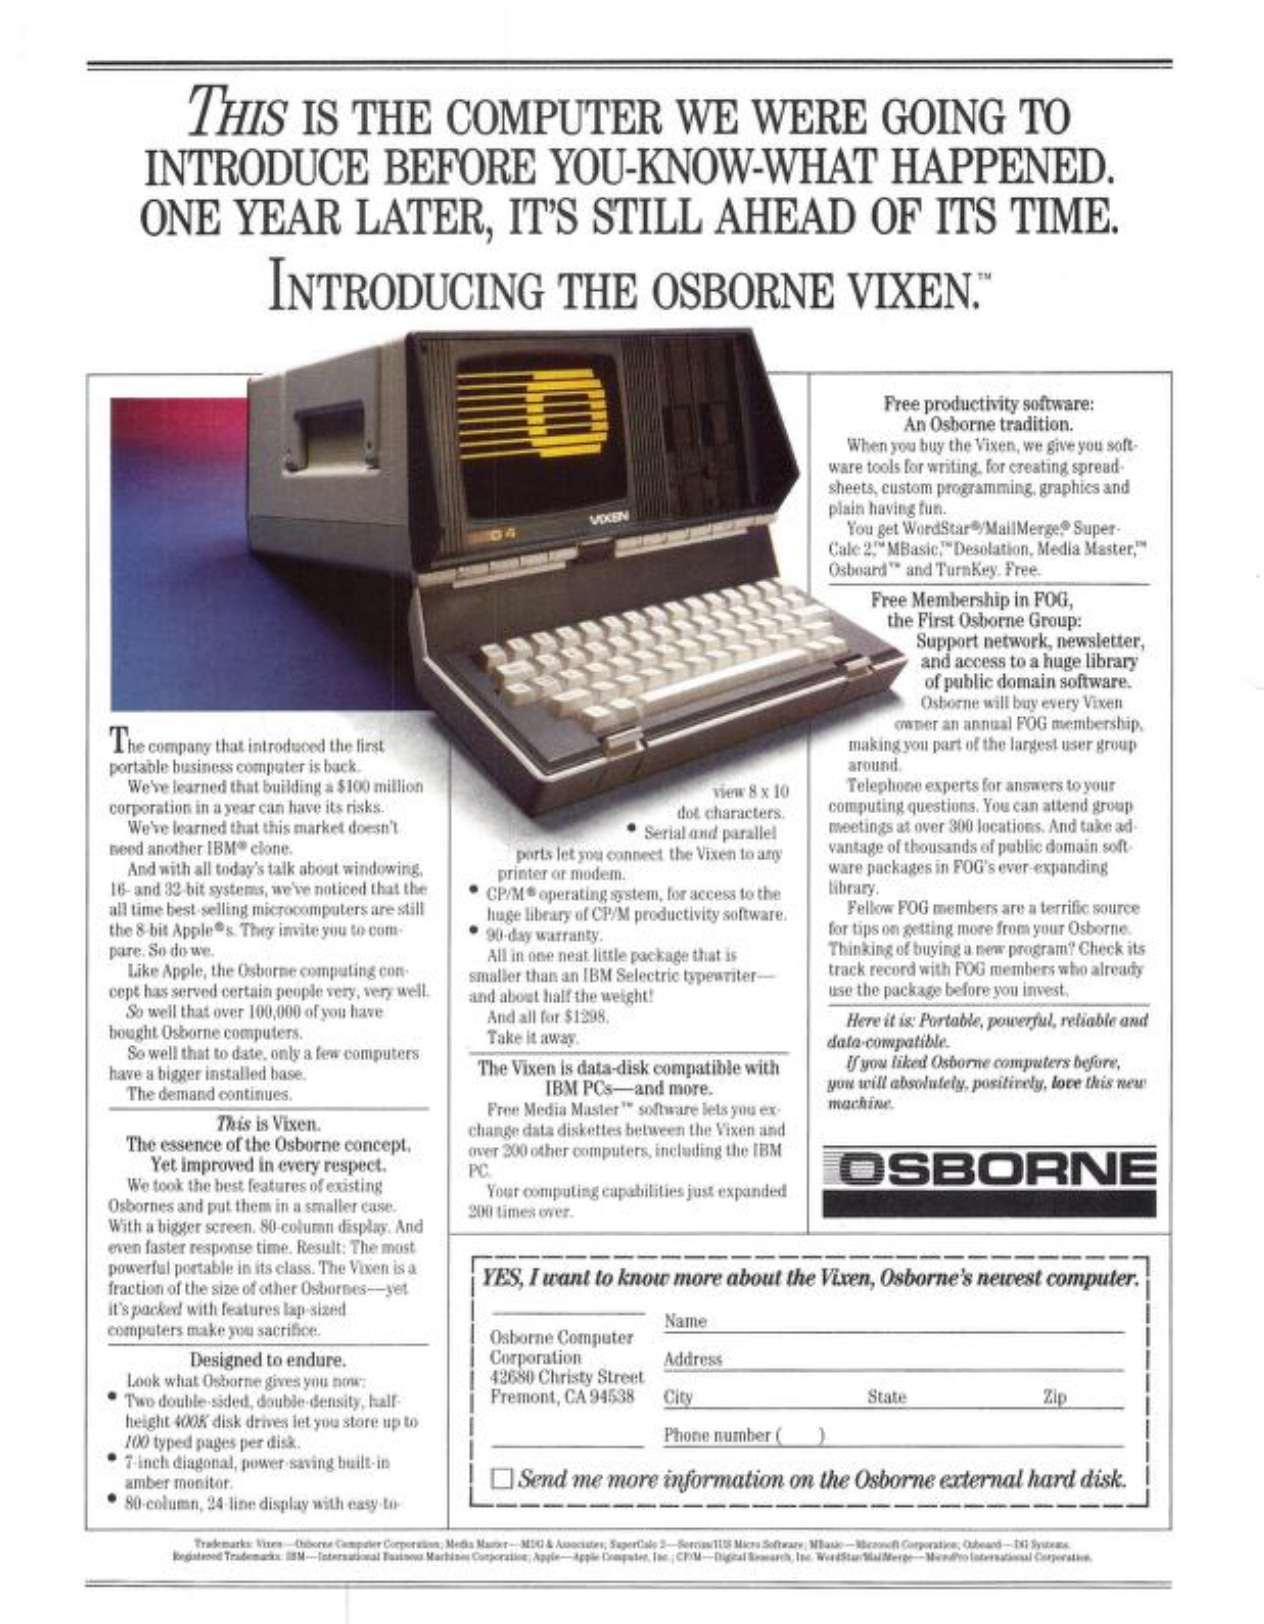 THIS IS THE COMPUTER WE WERE GOING TO INTRODUCE BEFORE YOU-KNOW-WHAT HAPPENED. ONE YEAR LATER, IT'S STILL AHEAD OF ITS TIME. INTRODUCING THE OSBORNE VIXEN." 'The company that introduced the linst portable business computer is back Wehe learned that building a $100 million corporation in a gear can have its risks. Wehe learned that this market doesn't reed another IBM® clone And with all today's talk about windowing. 16- and 39 bit systems, we've noticed that the all time best selling microcomputers are still the 8 bit Apole®: Ther invite you to com pare. So do we. Like Apple, the Osborne compating com- cept has served certain people very, very well. So well that over 100,000 of vou have bought. Osborne computers. So well that to date, only a few computers have a bigger installed base. The demand continues. This is Vixent. The essence of the Osborne concept. Yet improved in every respect. We took the best features of existing Osbornes and put them in a smaller case. With a biger screen. S0-column displag. And even faster response time. Result: The most powerfal portable in its class. The Visen is a fraction of the size of other Osbornes- -jet it's packerd with features lap -sized computers make you sacrifice. Designed to endure. Look what Osborne gives you no: • Teo double sided, double density, half- height 4005 disk drives let you store up to 100 typed pages per disk. • 7 inch diagonal, power saving built-in amber monitor • So-coluron, 24-line display with easy ita vien 8 x 10 dot characters. • Serial and paralle! ports let jos connect the Vixen to arry printer or modem. • CP/M® operating sostem, for access to the luge library of CP/M productivity software. • 90-dar warranty. All in one neat little package that is smaller than an IBM Selectric tpenriter- and about half the weight! And all for $1298 Take it away. The Vixen is data-disk compatible with IBM PCs-and more. Free Media Master"* software lets you ex. chance data diskettes betueen the Vixen and over 300 other computers, including the IBM PC Your computing capabilities just expanded 900 times over. Free productivity software: An Osborne tradition. When you buy the Vixen, we give you software tools for writing. for creating spread-sheets, custom programming, graphics and plain having fin. You get WordStar® Mai Merge® Super. Cale 25" MBasie:"'Desolation, Media Master," Osboard** and TurnKey. Free. Free Membership in FOG, the First Osborne Group: Support network, newsletter, and access to a huge library of public domain software. Oshorne will buy every Vixen omer an annual FOG membership, making you part of the largest user group around Telephone experts for answers to your computing questions. You can attend groap meetings at over 800 locations. And take ad vantage of thousands of pablic domain soft. ware packages in FOG's ever expanding library. Fellow FOG members are a terrific source for tips on getting more from your Osborne. Thinking of buging a new program? Check its track record with FOG members who alreads use the packaze before sou invest. Here it is: Portable, powerfal, retiable and dato -compatible. Oyou liked Osborne computers befure, yon will absolufeig positively, love this new machine.